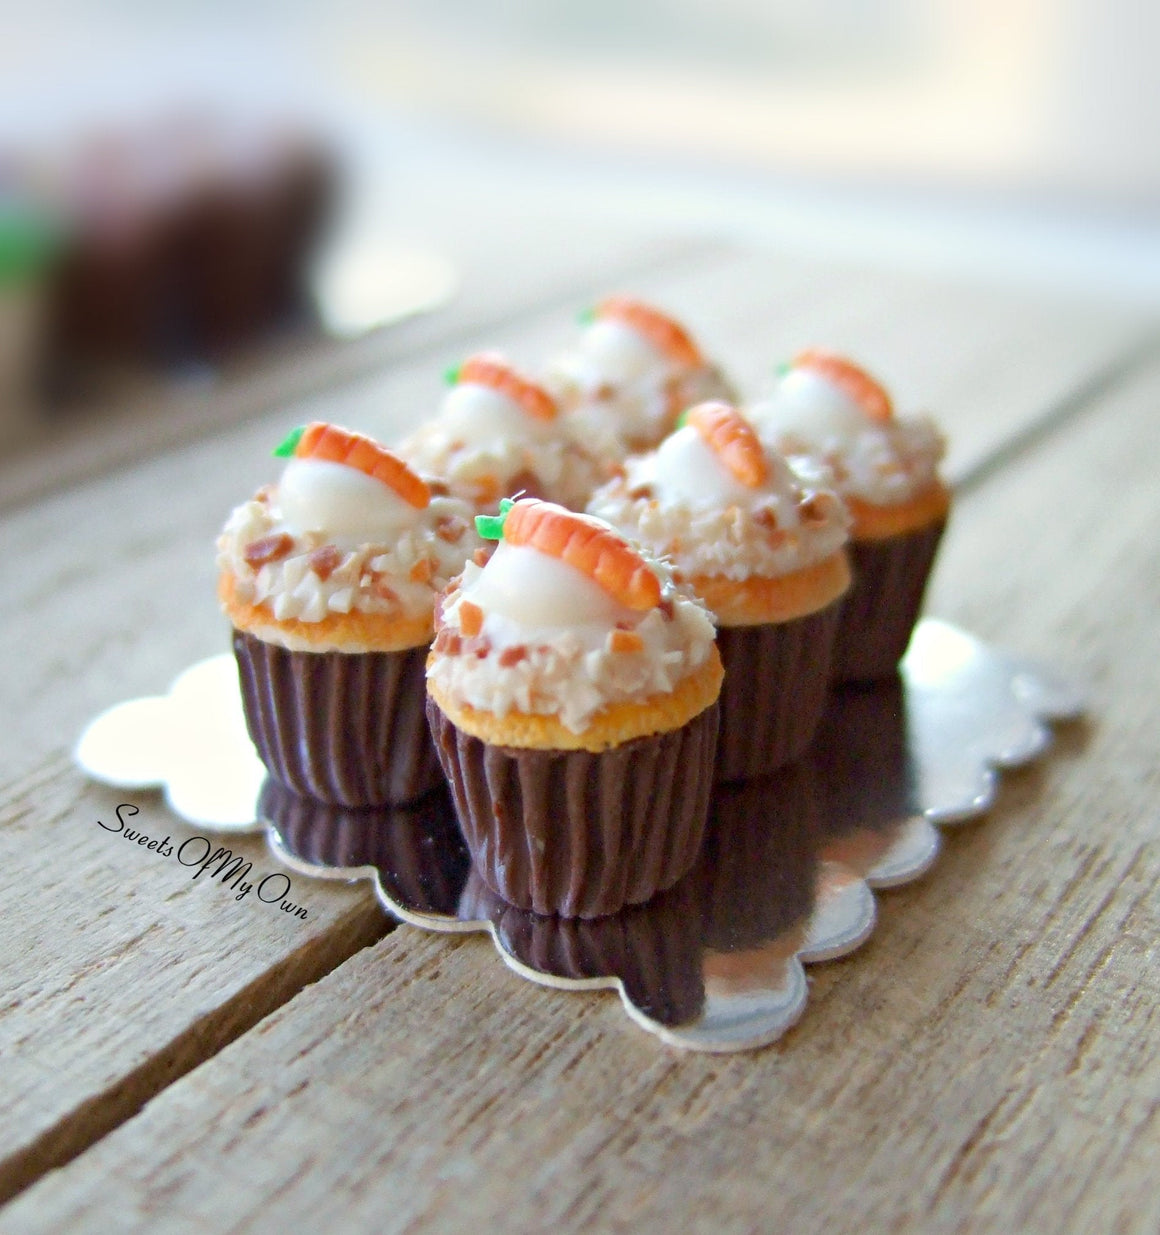 MTO - Miniature Carrot Cake Cupcakes - Set of 6 Cupcakes - Doll House 1:12 Scale - SweetsOfMyOwn